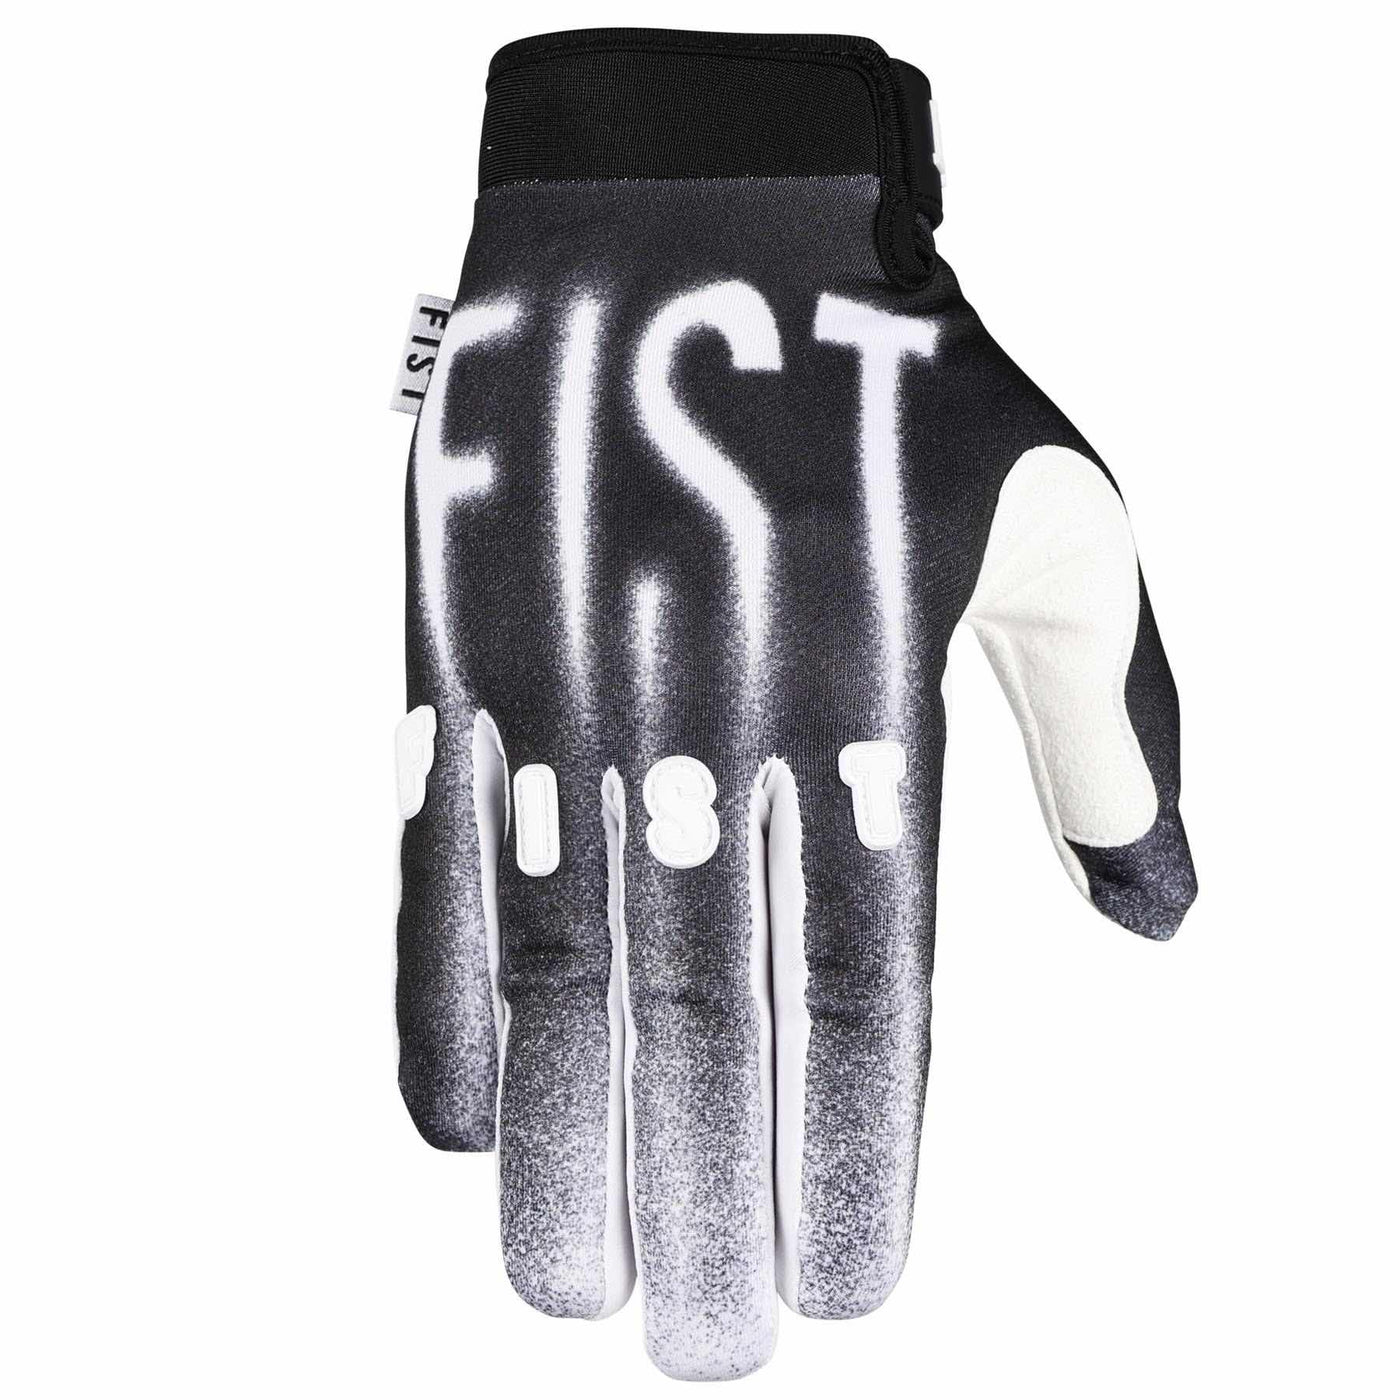 FIST Gloves - Blur front | 8Lines.eu - Next day shipping, Best Offers